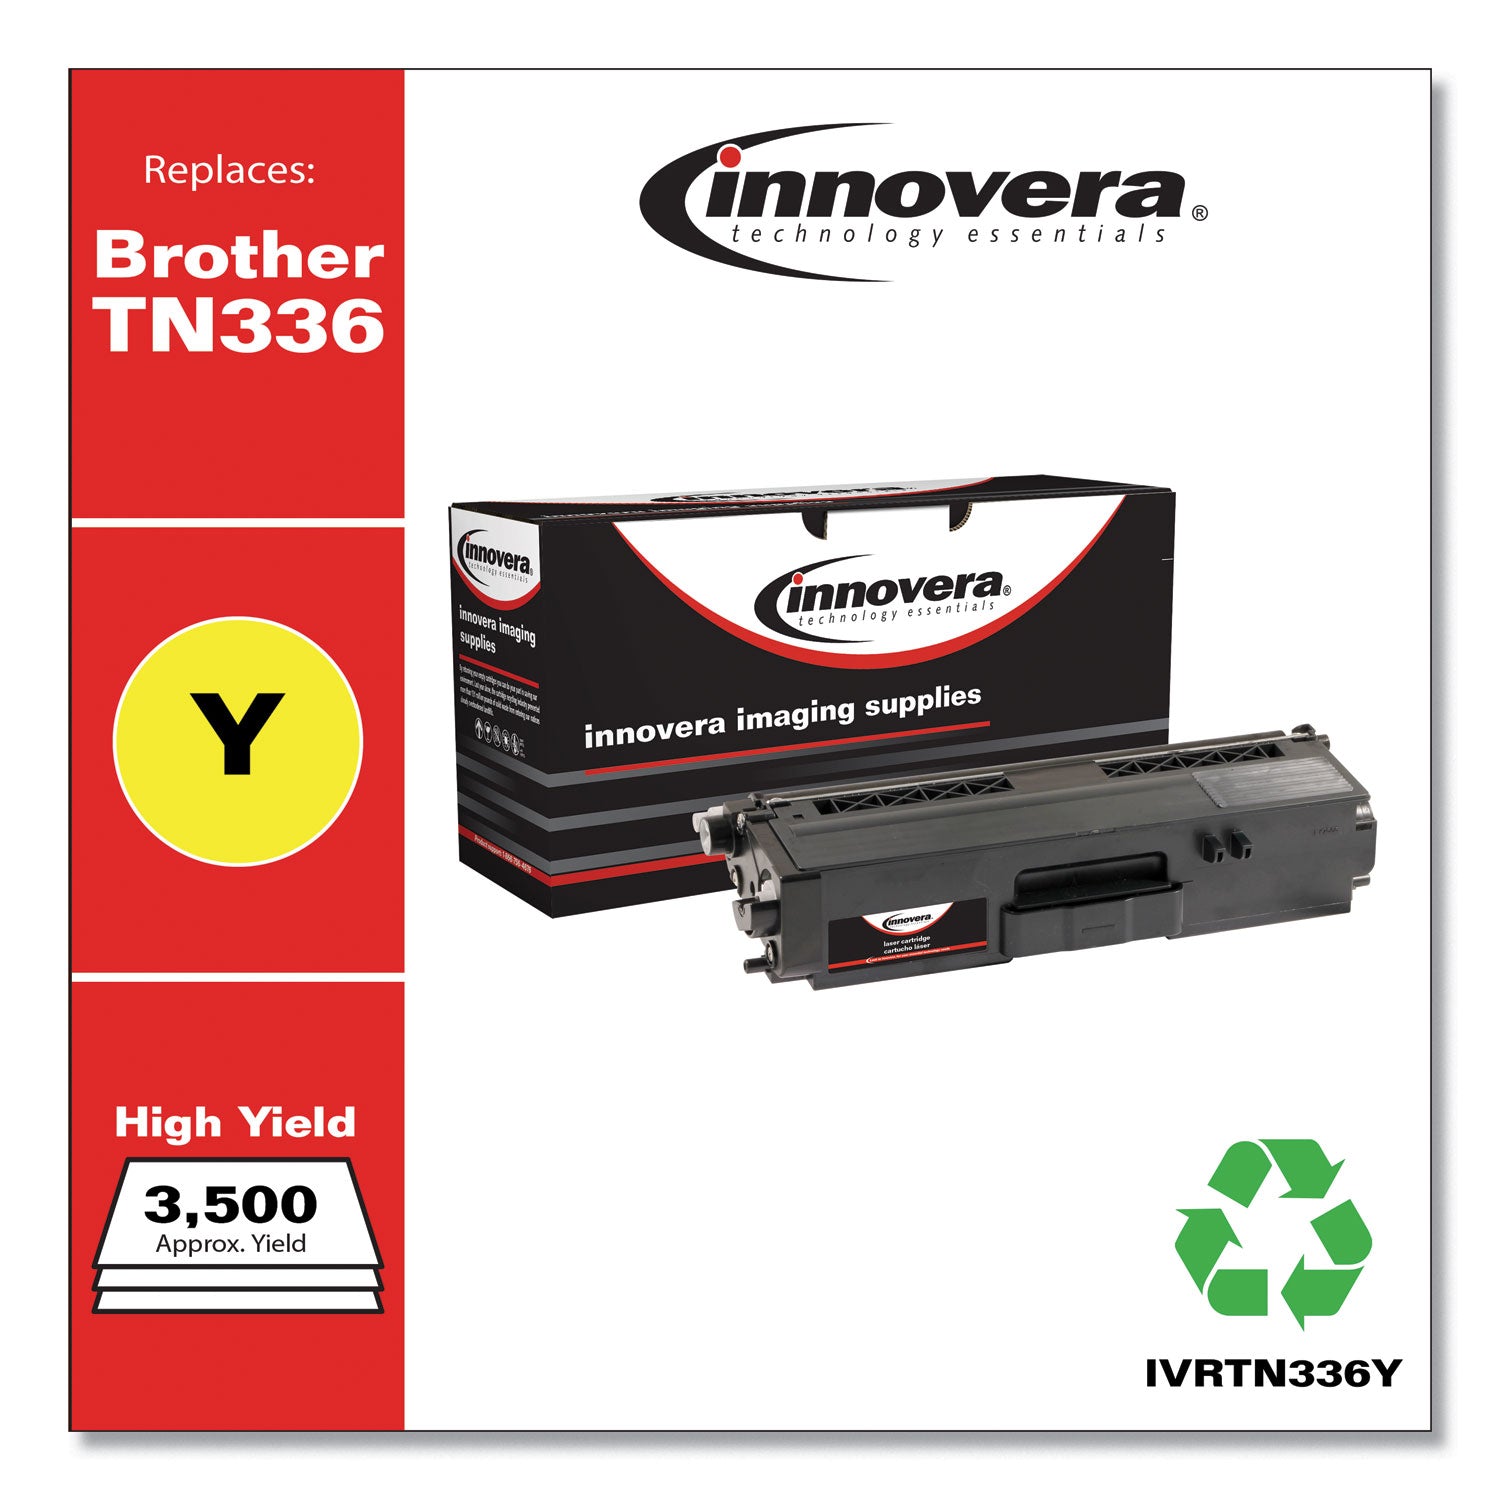 remanufactured-yellow-high-yield-toner-replacement-for-tn336y-3500-page-yield-ships-in-1-3-business-days_ivrtn336y - 2